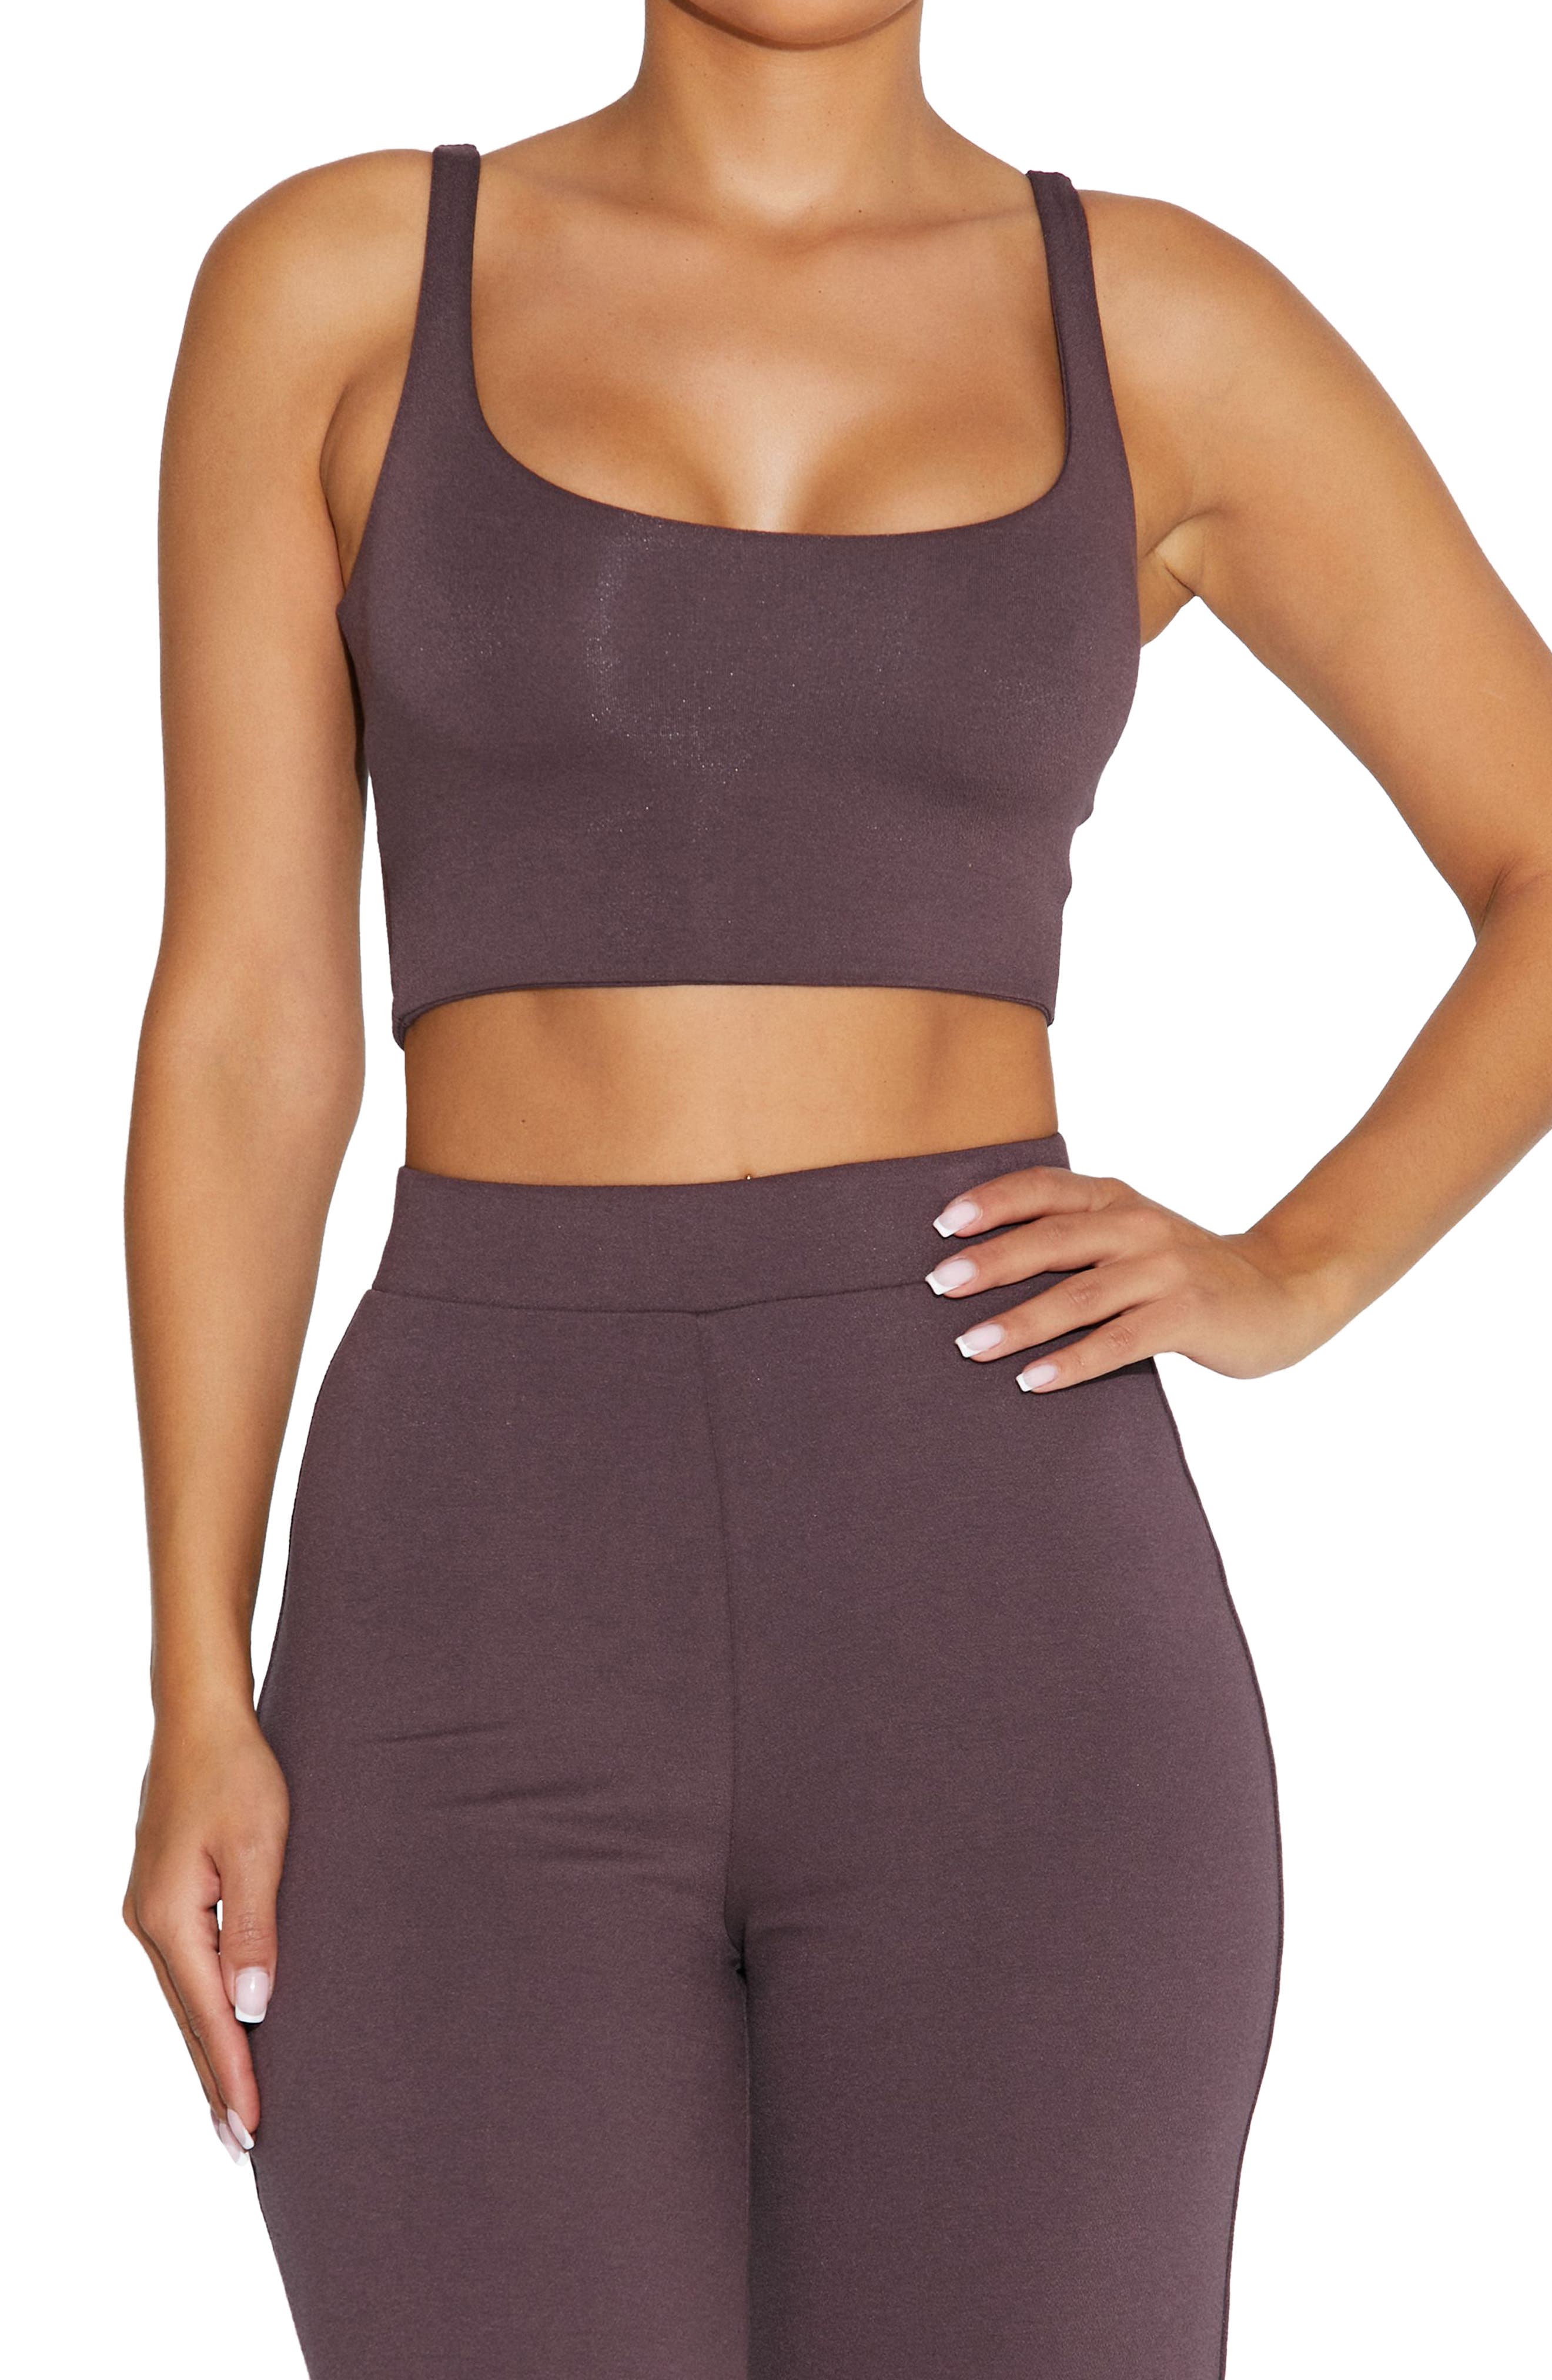 Naked Wardrobe the NW Crop Top in Coco, Size Medium 